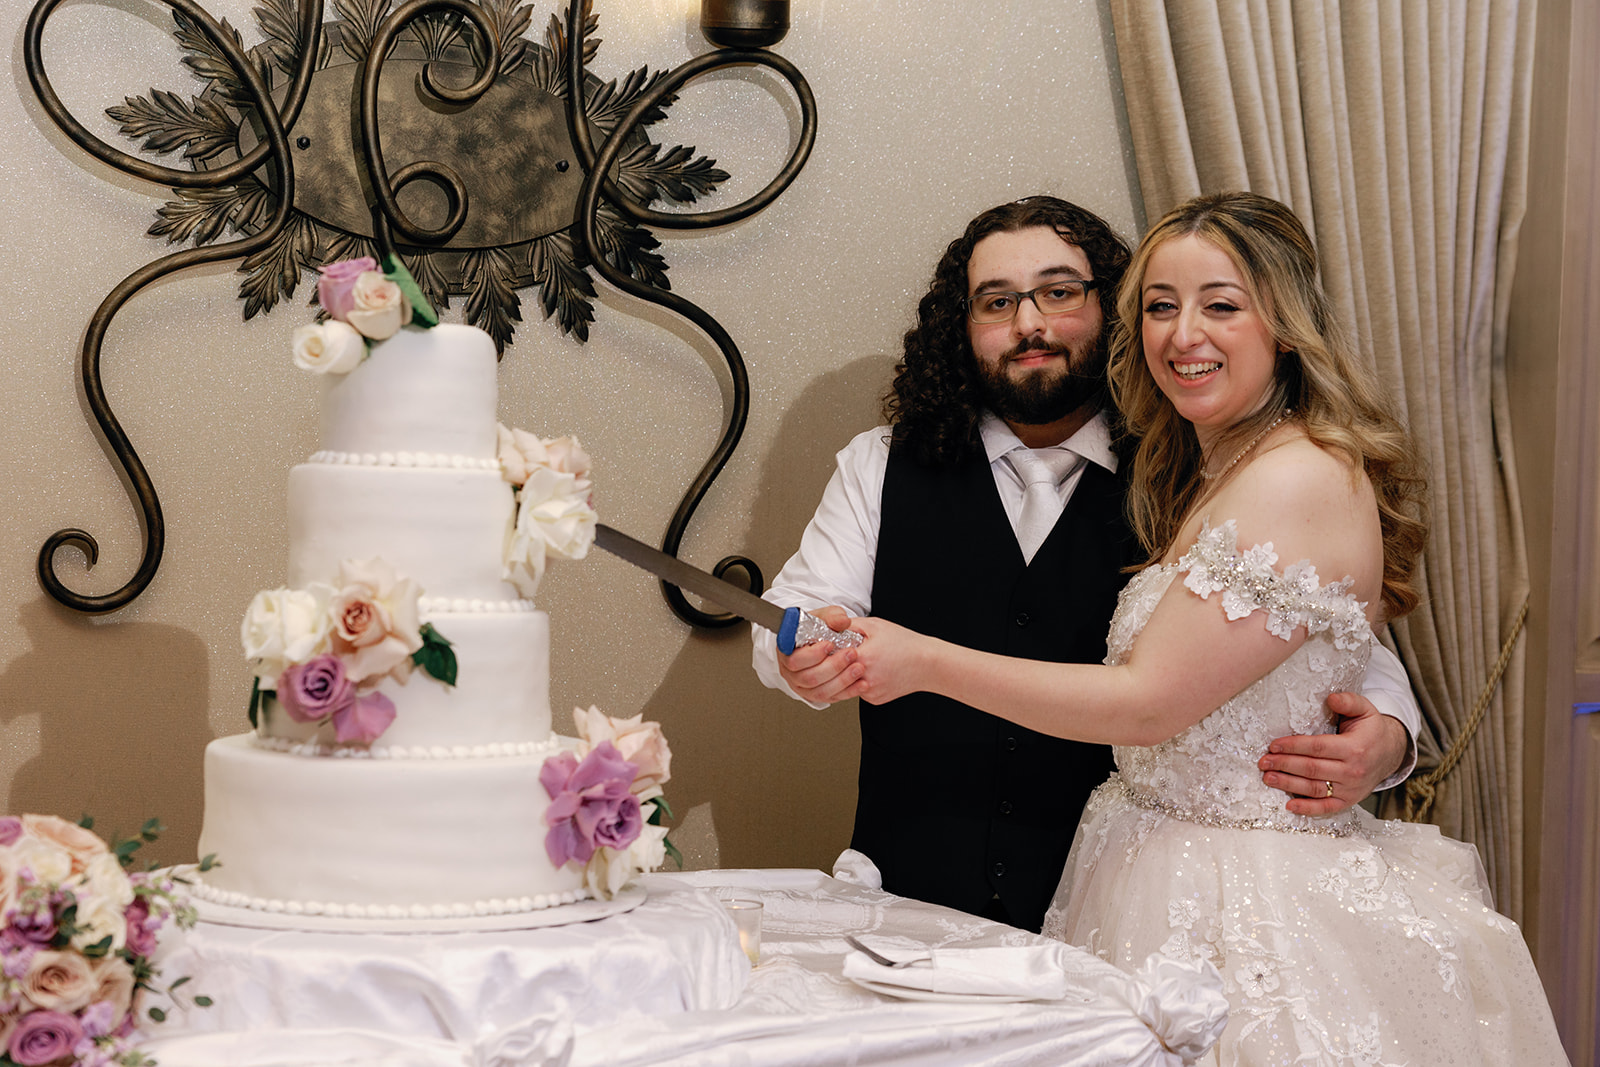 Newlyweds laugh and smile while preparing to cut their four tier cake at their Crest Hollow Country Club Wedding